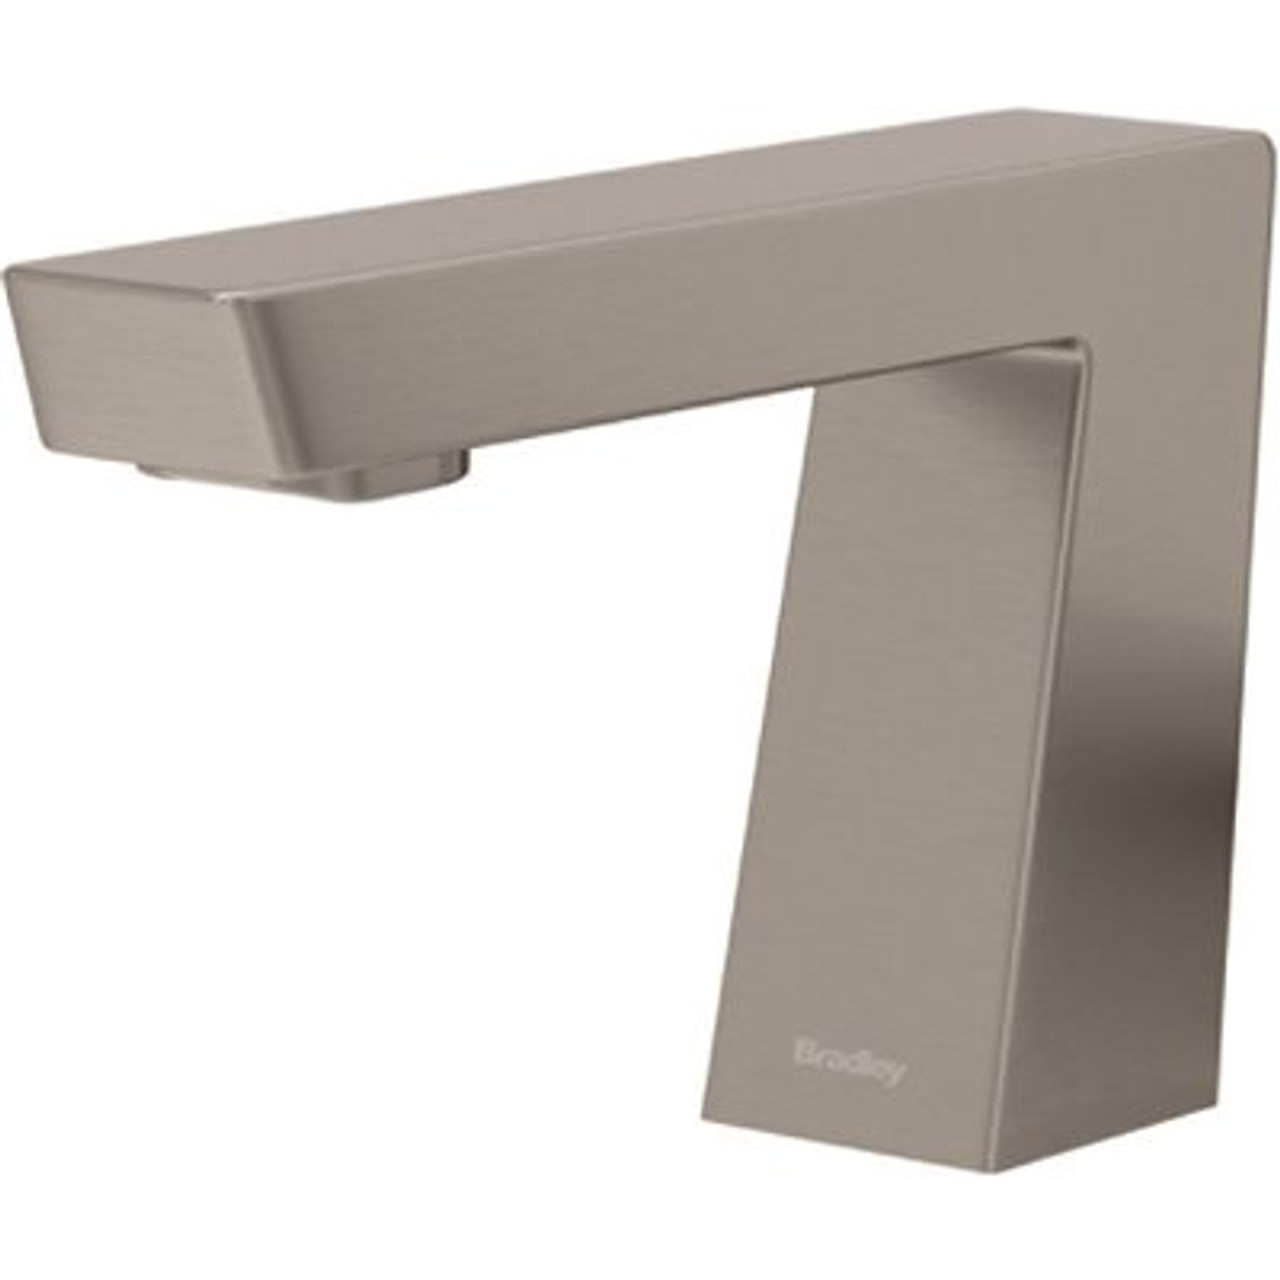 Bradley Zen Verge Faucet In Brushed Stainless